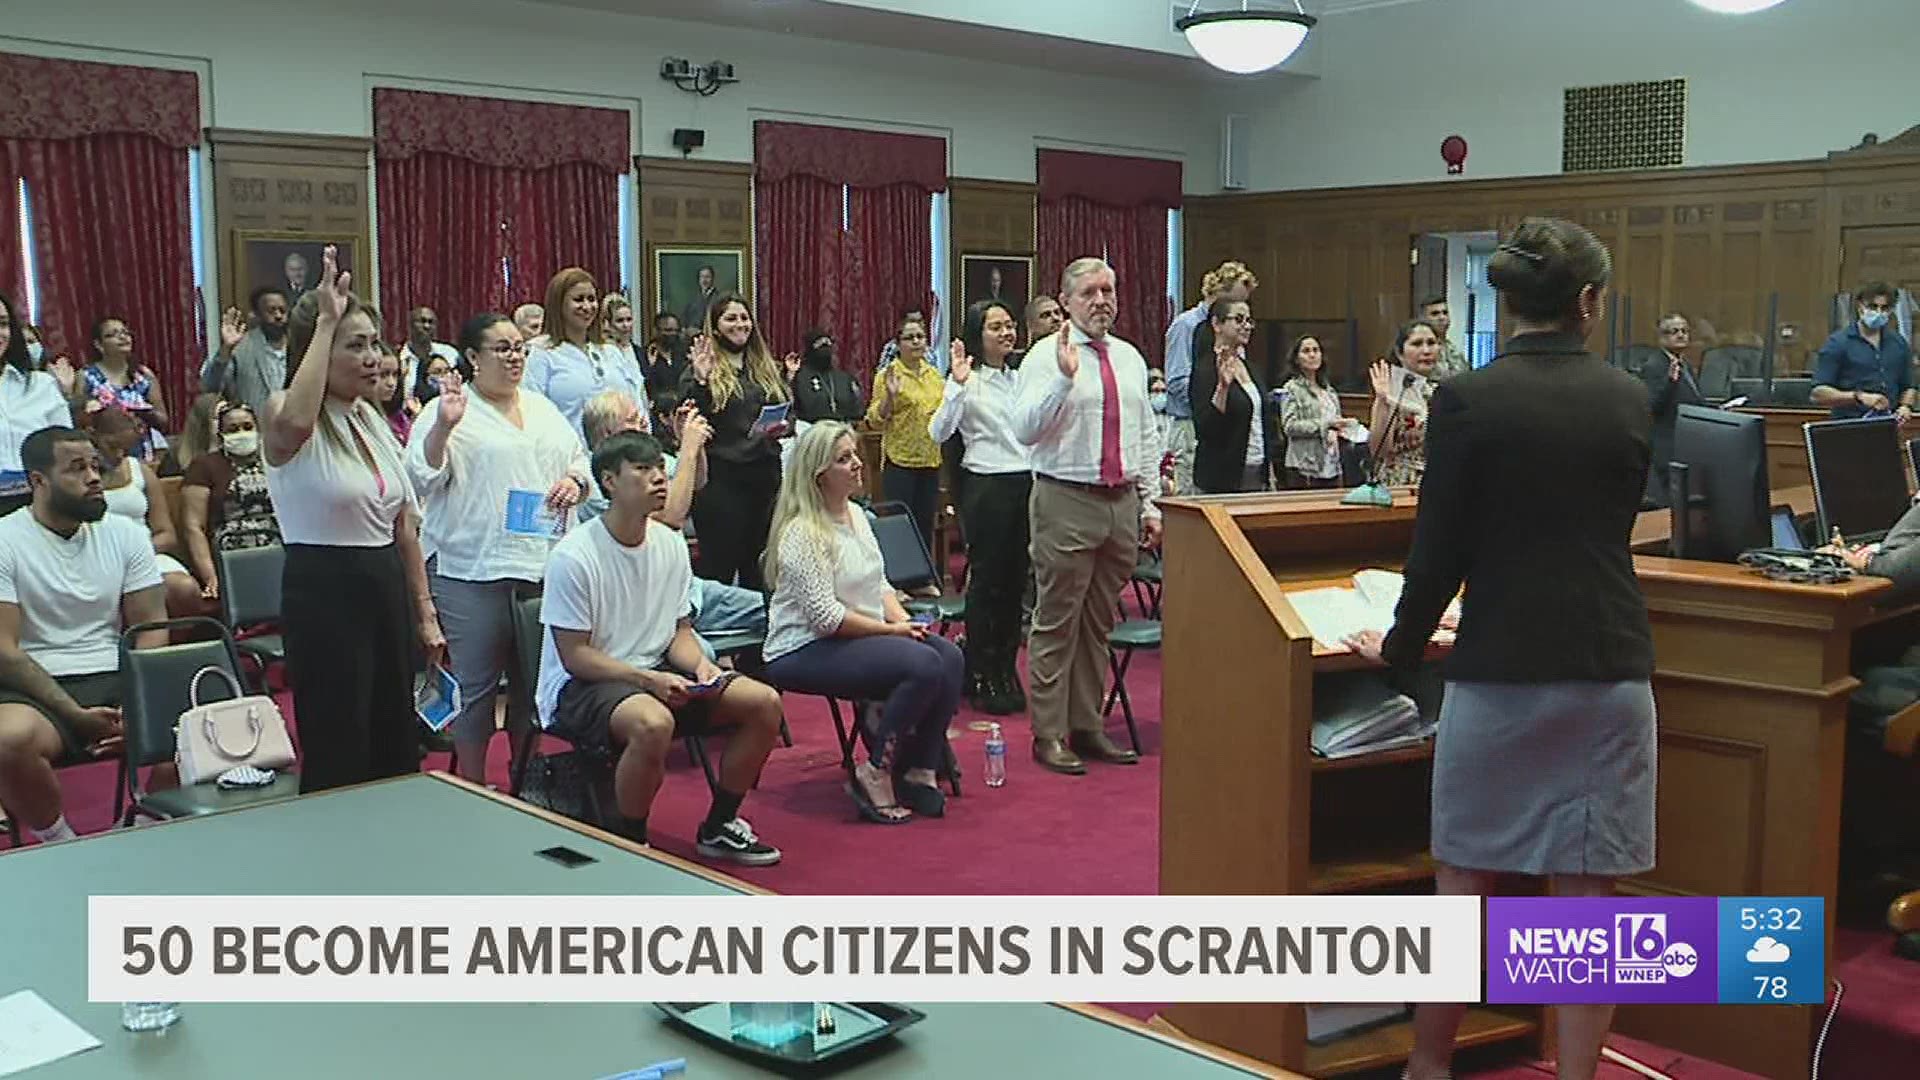 A special day for almost 50 new U.S. citizens—the first in-person naturalization ceremony was held at the federal courthouse in Scranton since the pandemic.